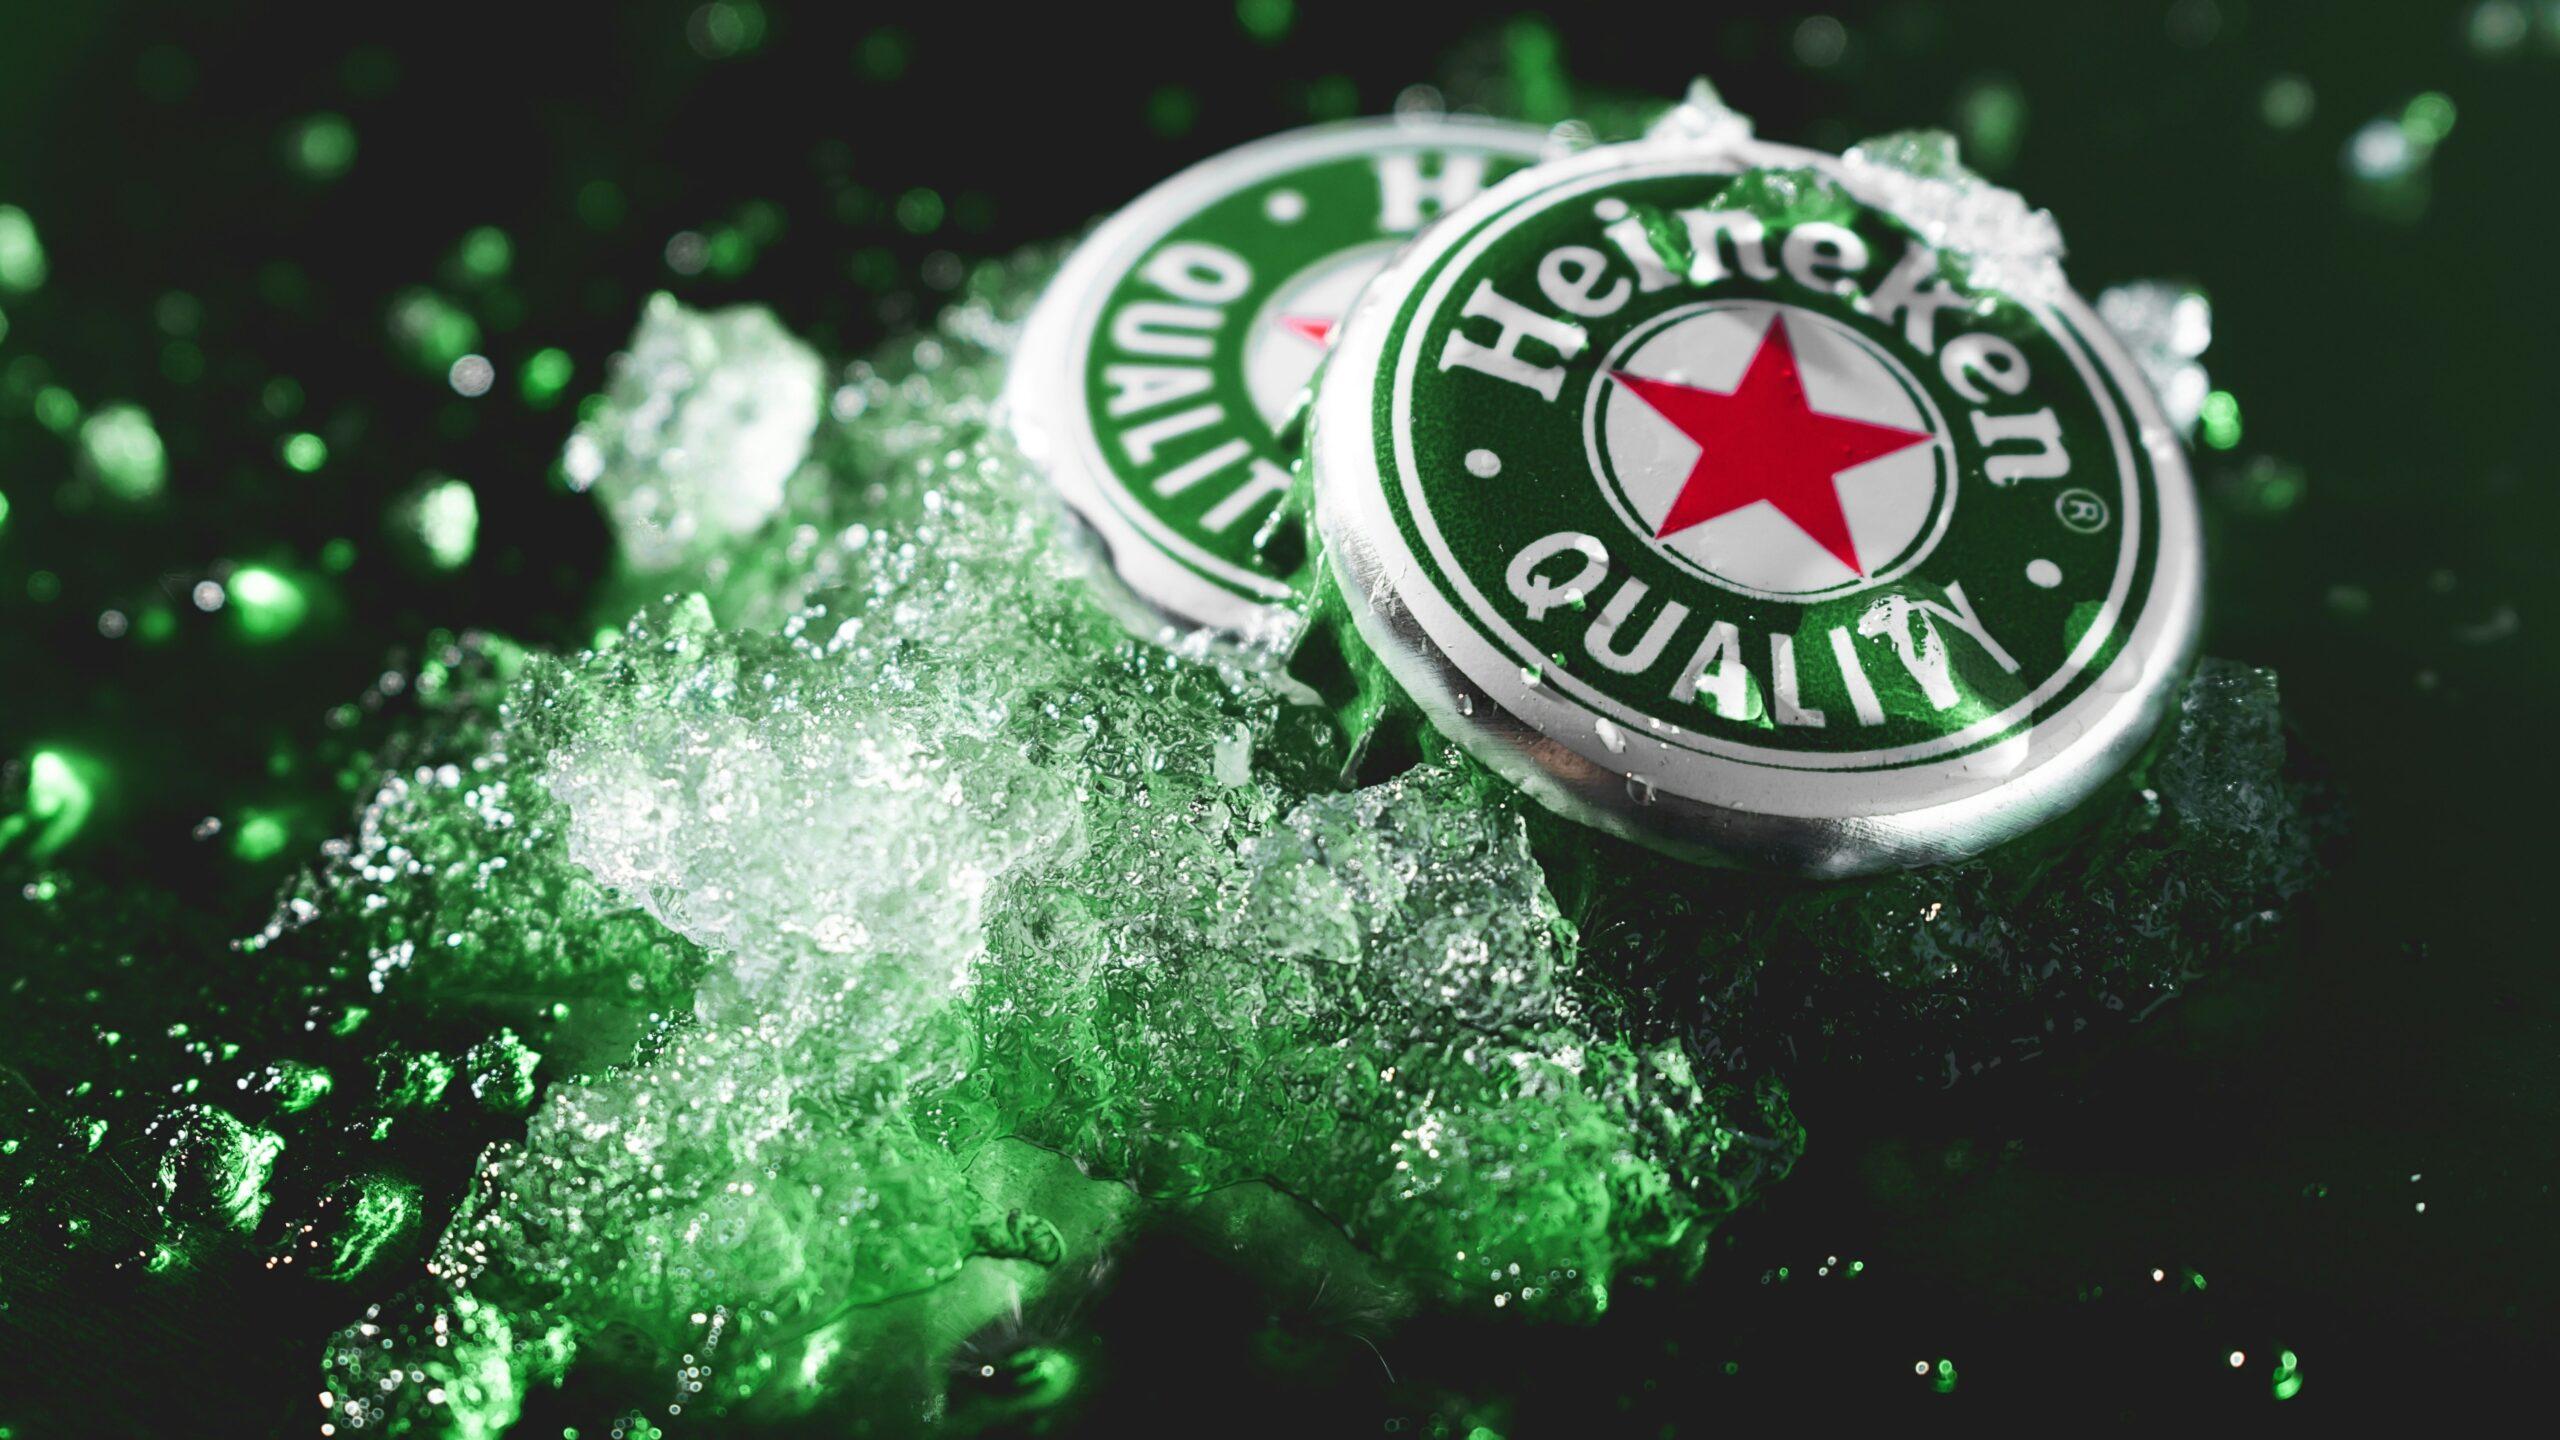 Two Heineken beer bottle tops placed upright on crushed ice.